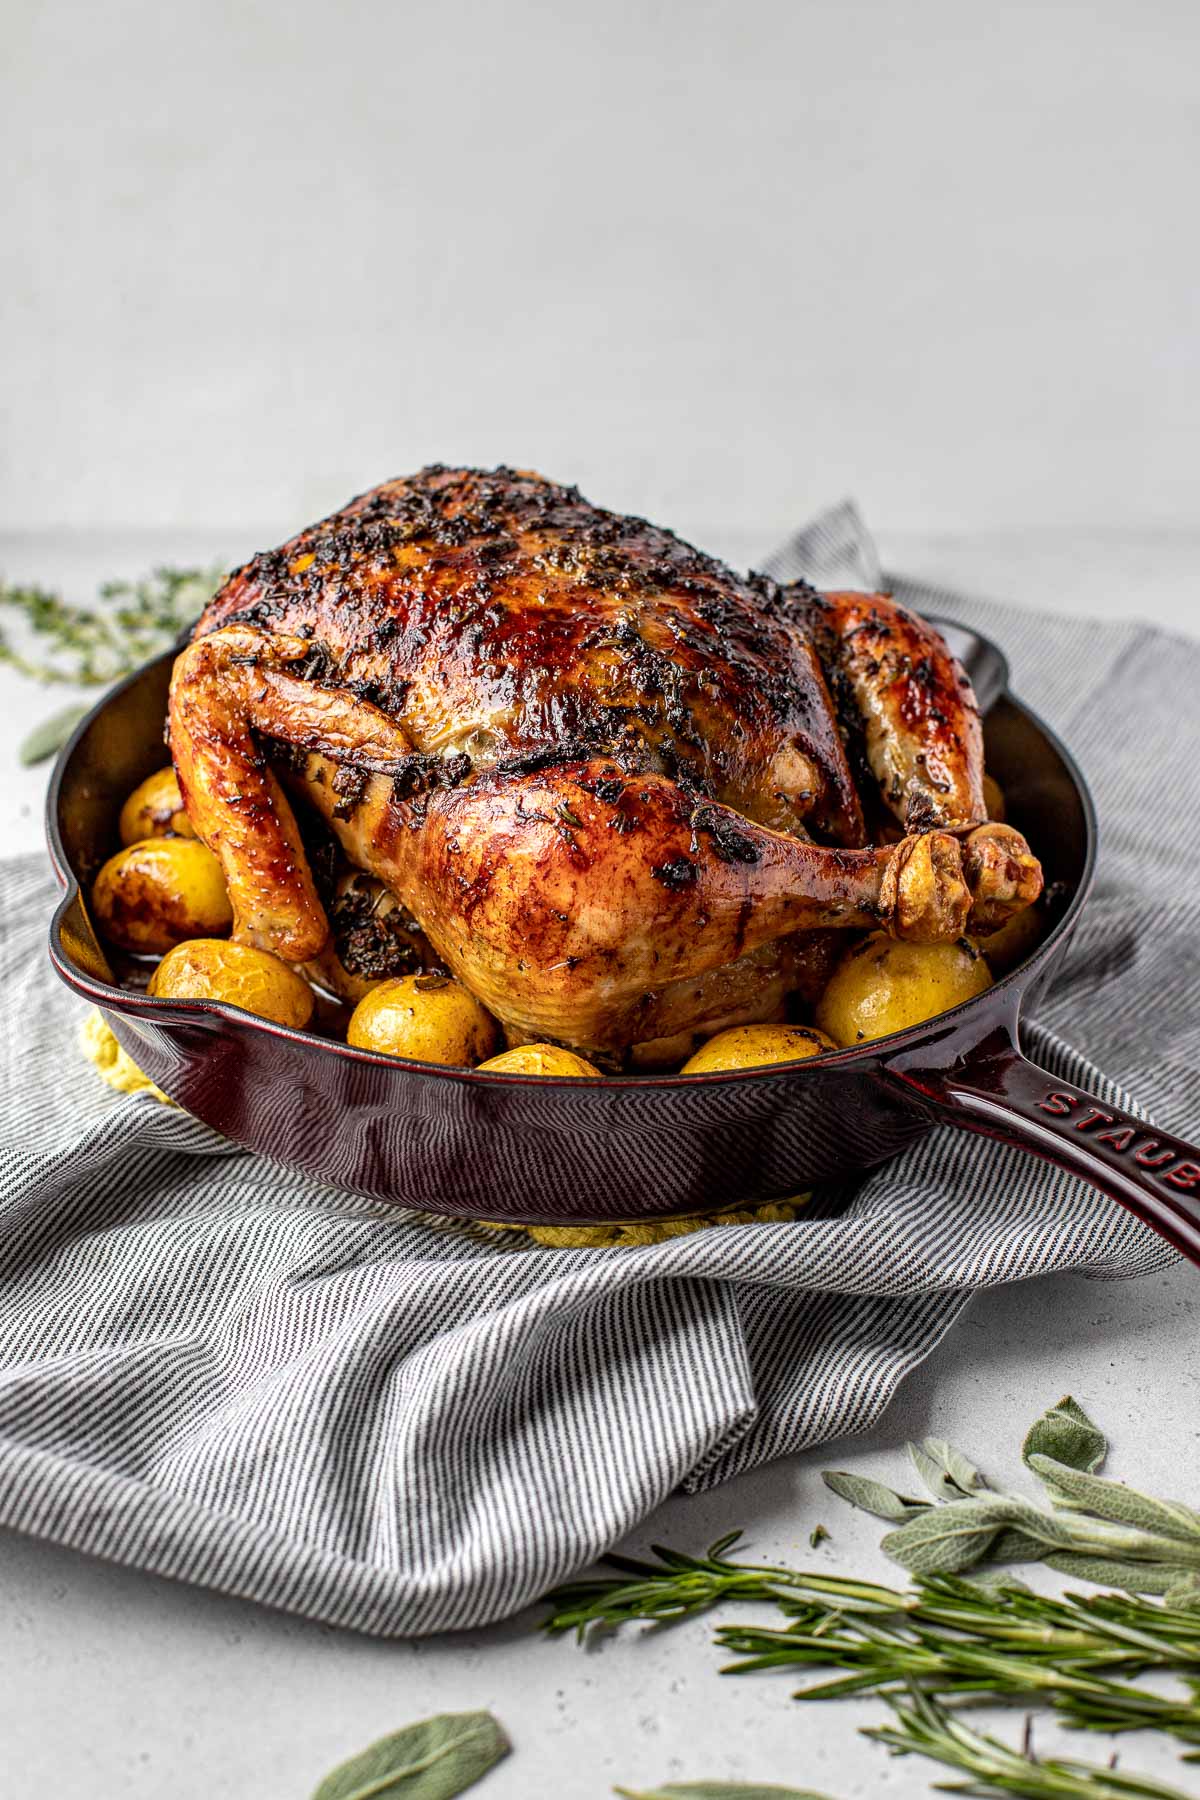 A finished roasted Thanksgiving Chicken atop a layer of roasted baby potatoes in a large cast iron skillet sits atop a blue and white striped linen napkin laid out on a lightly colored textured surface. Loose sprigs of fresh herbs surround the skillet in both the foreground and background.